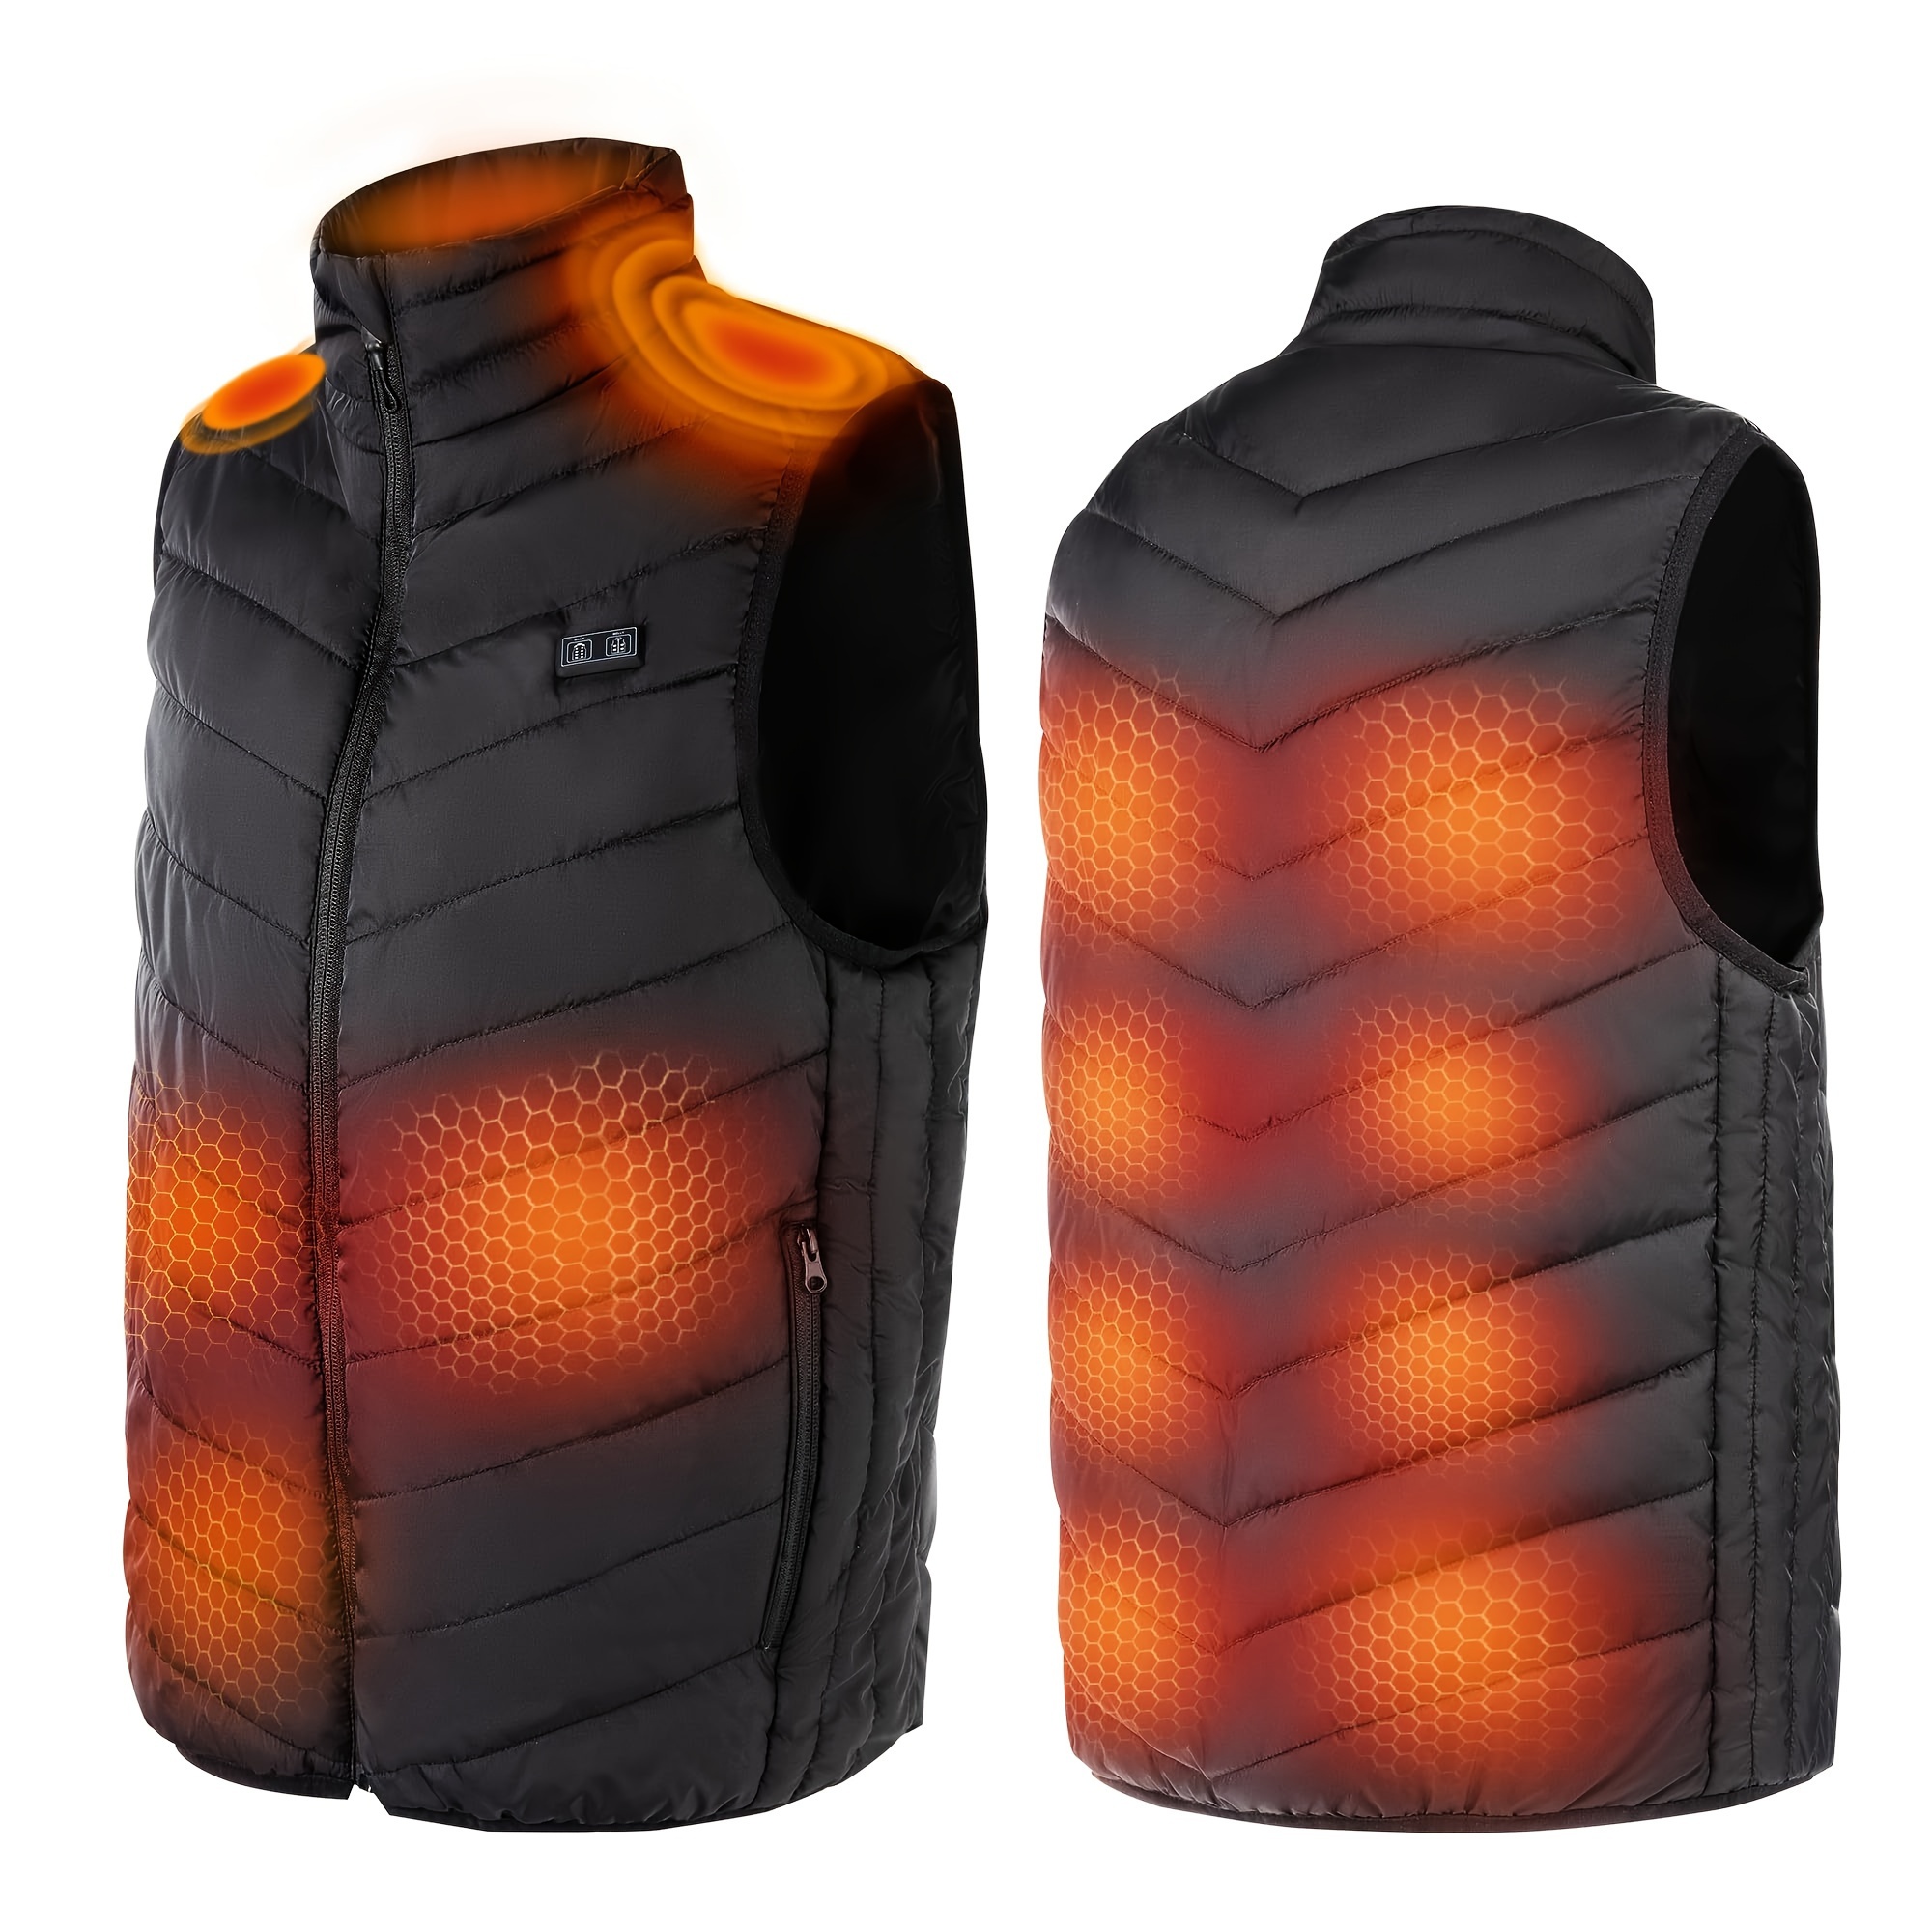 

Alljoy Heated Vest With Battery Pack Included, Heated Vest For Men Women, Unisex Lightweight Warming Electric Heated Vest